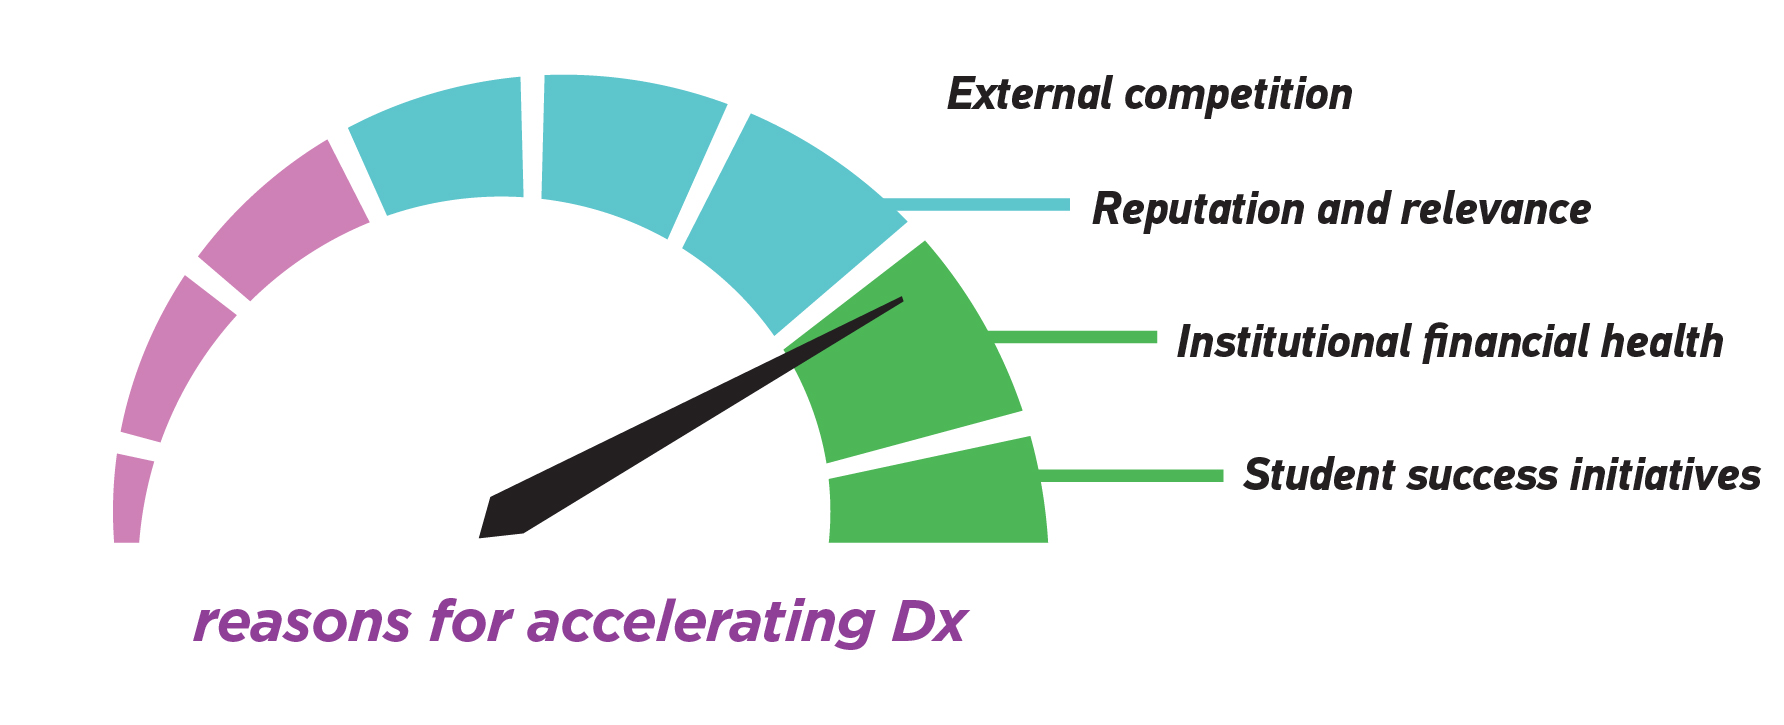 Top reasons for accelerating Dx: Student success intiatives, institutional financial health, reputation and relevance, and external competition